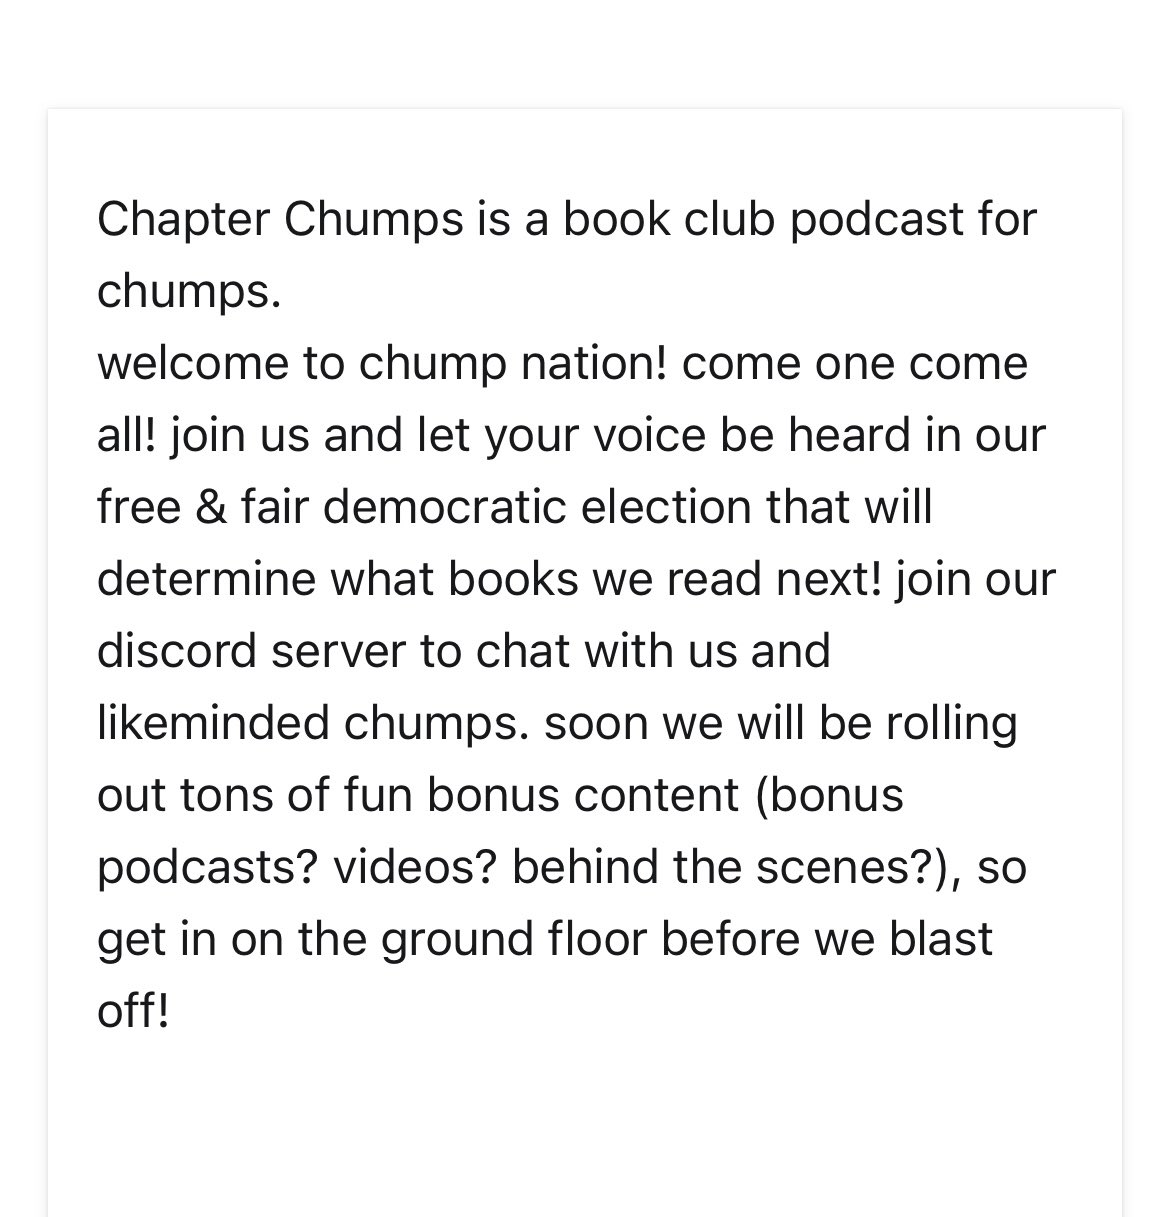 Chapter Chumps